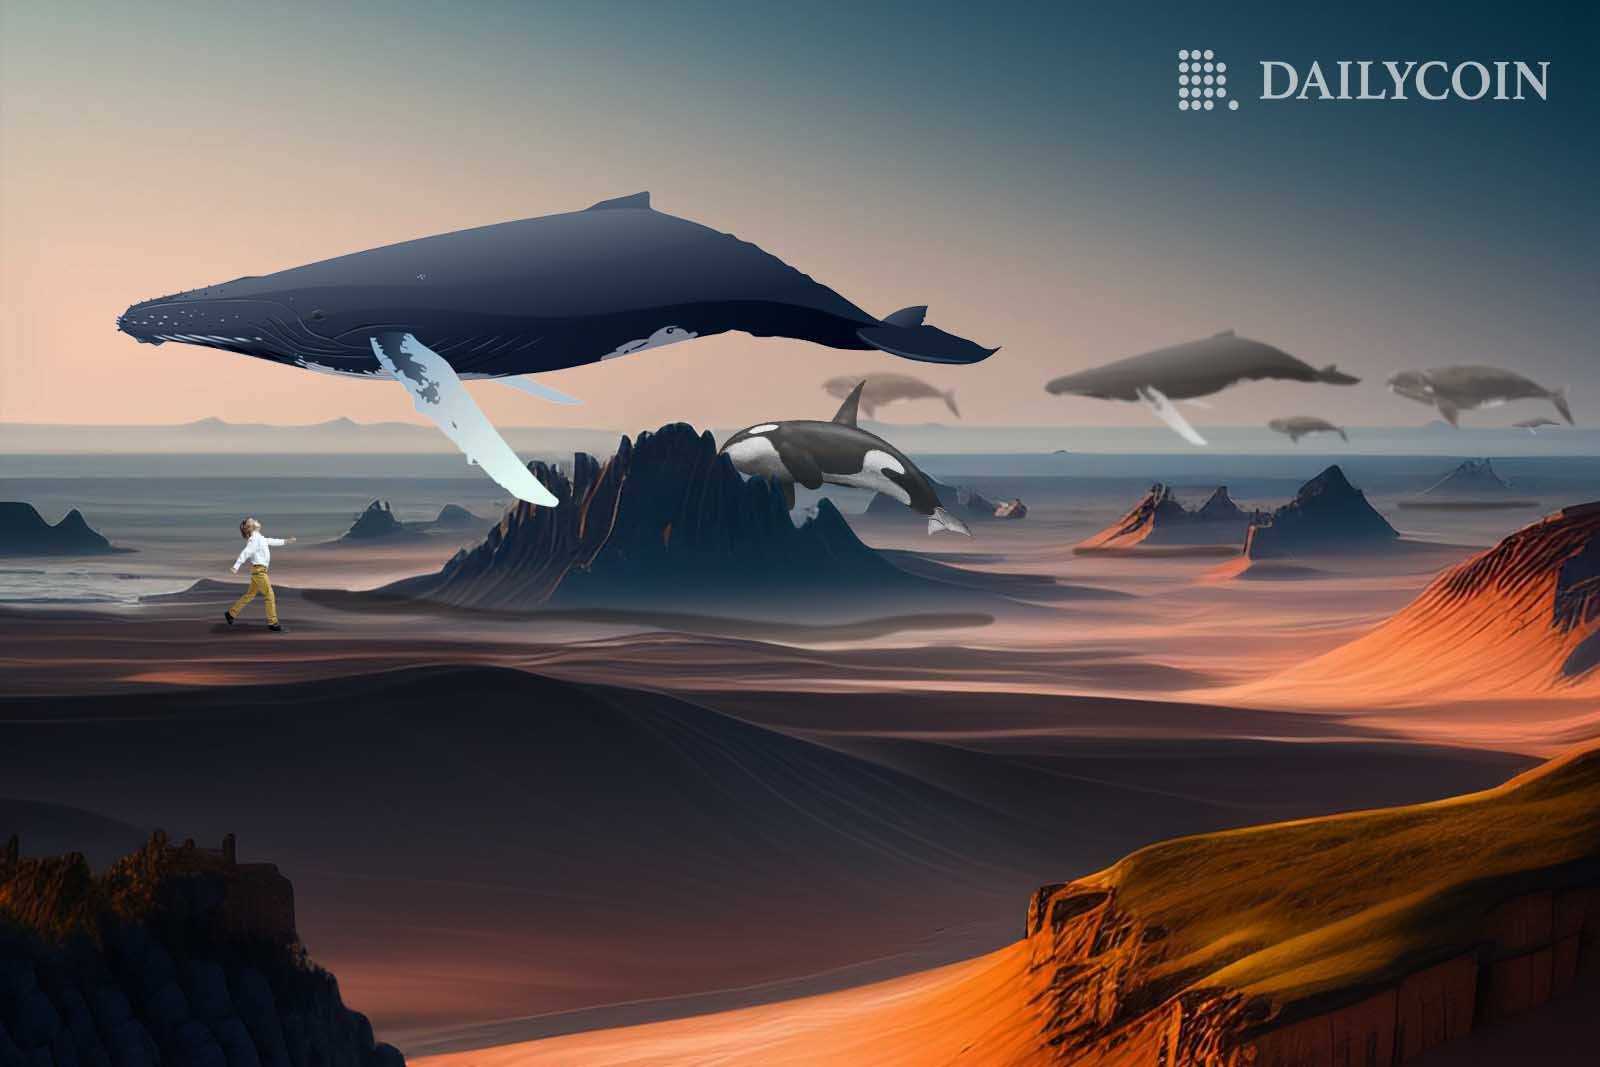 Whales flying around in a desert